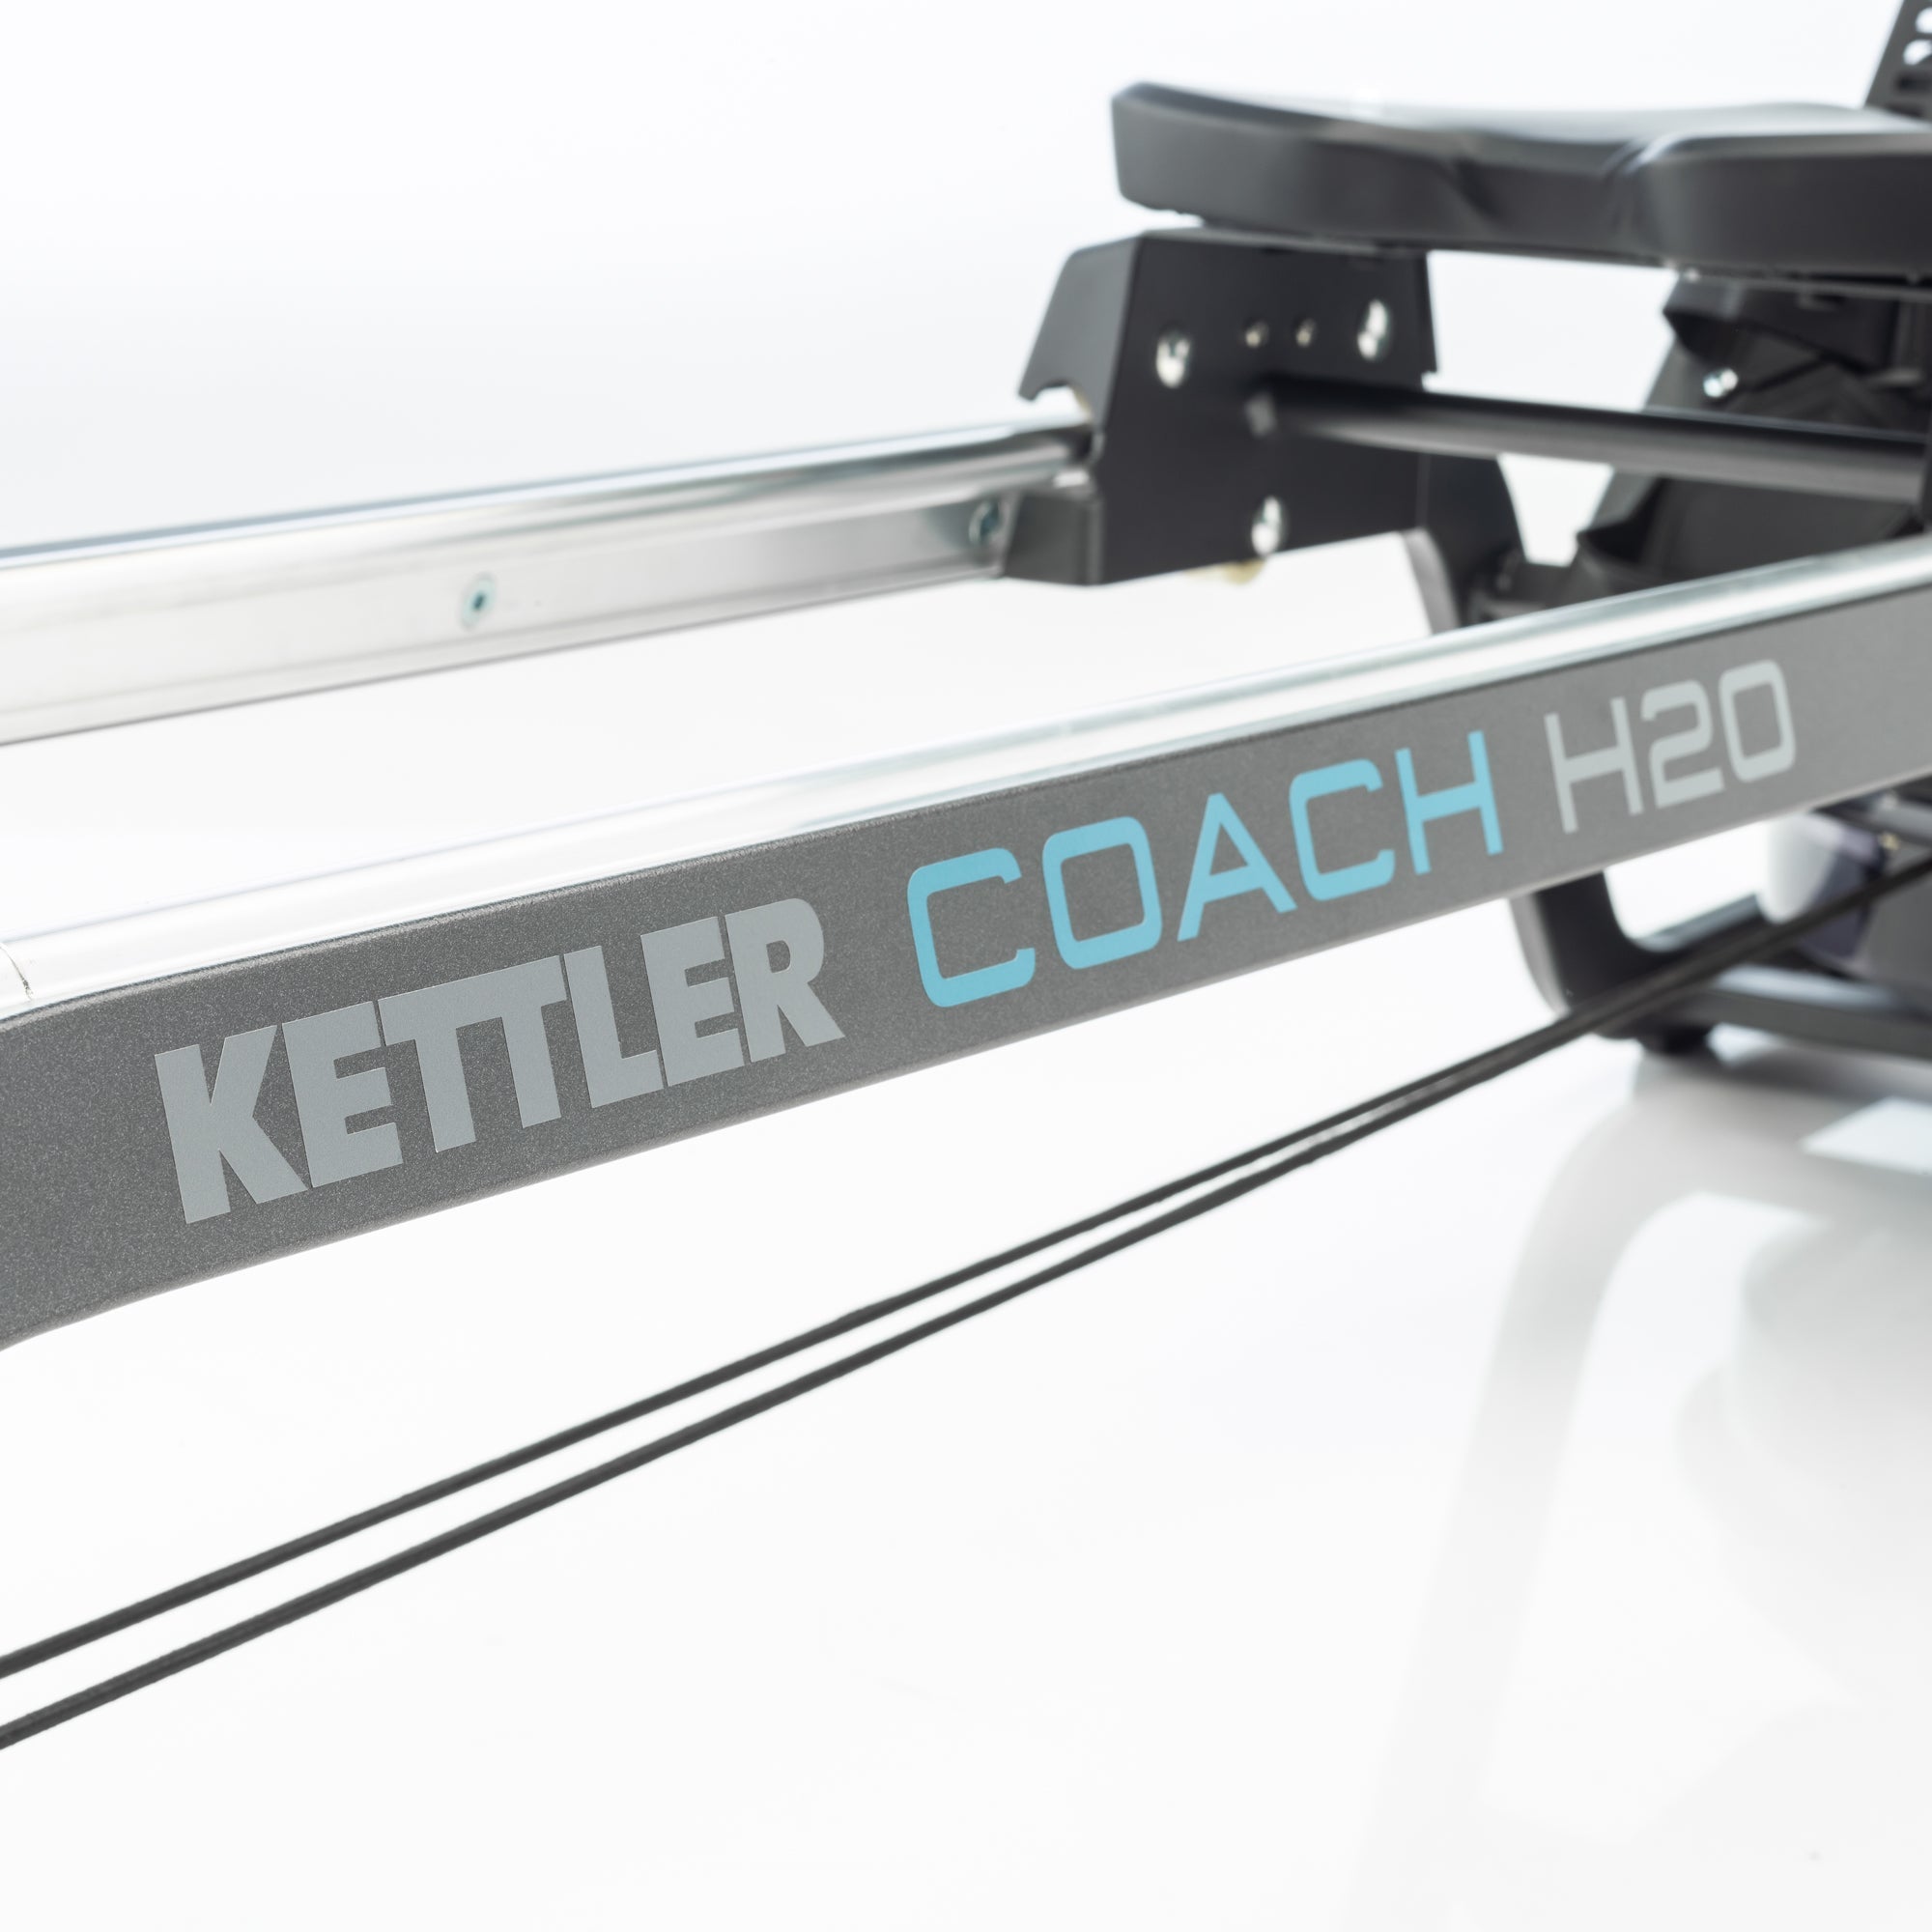 Closeup studio image of the frame on the Coach H20 rowing machine.